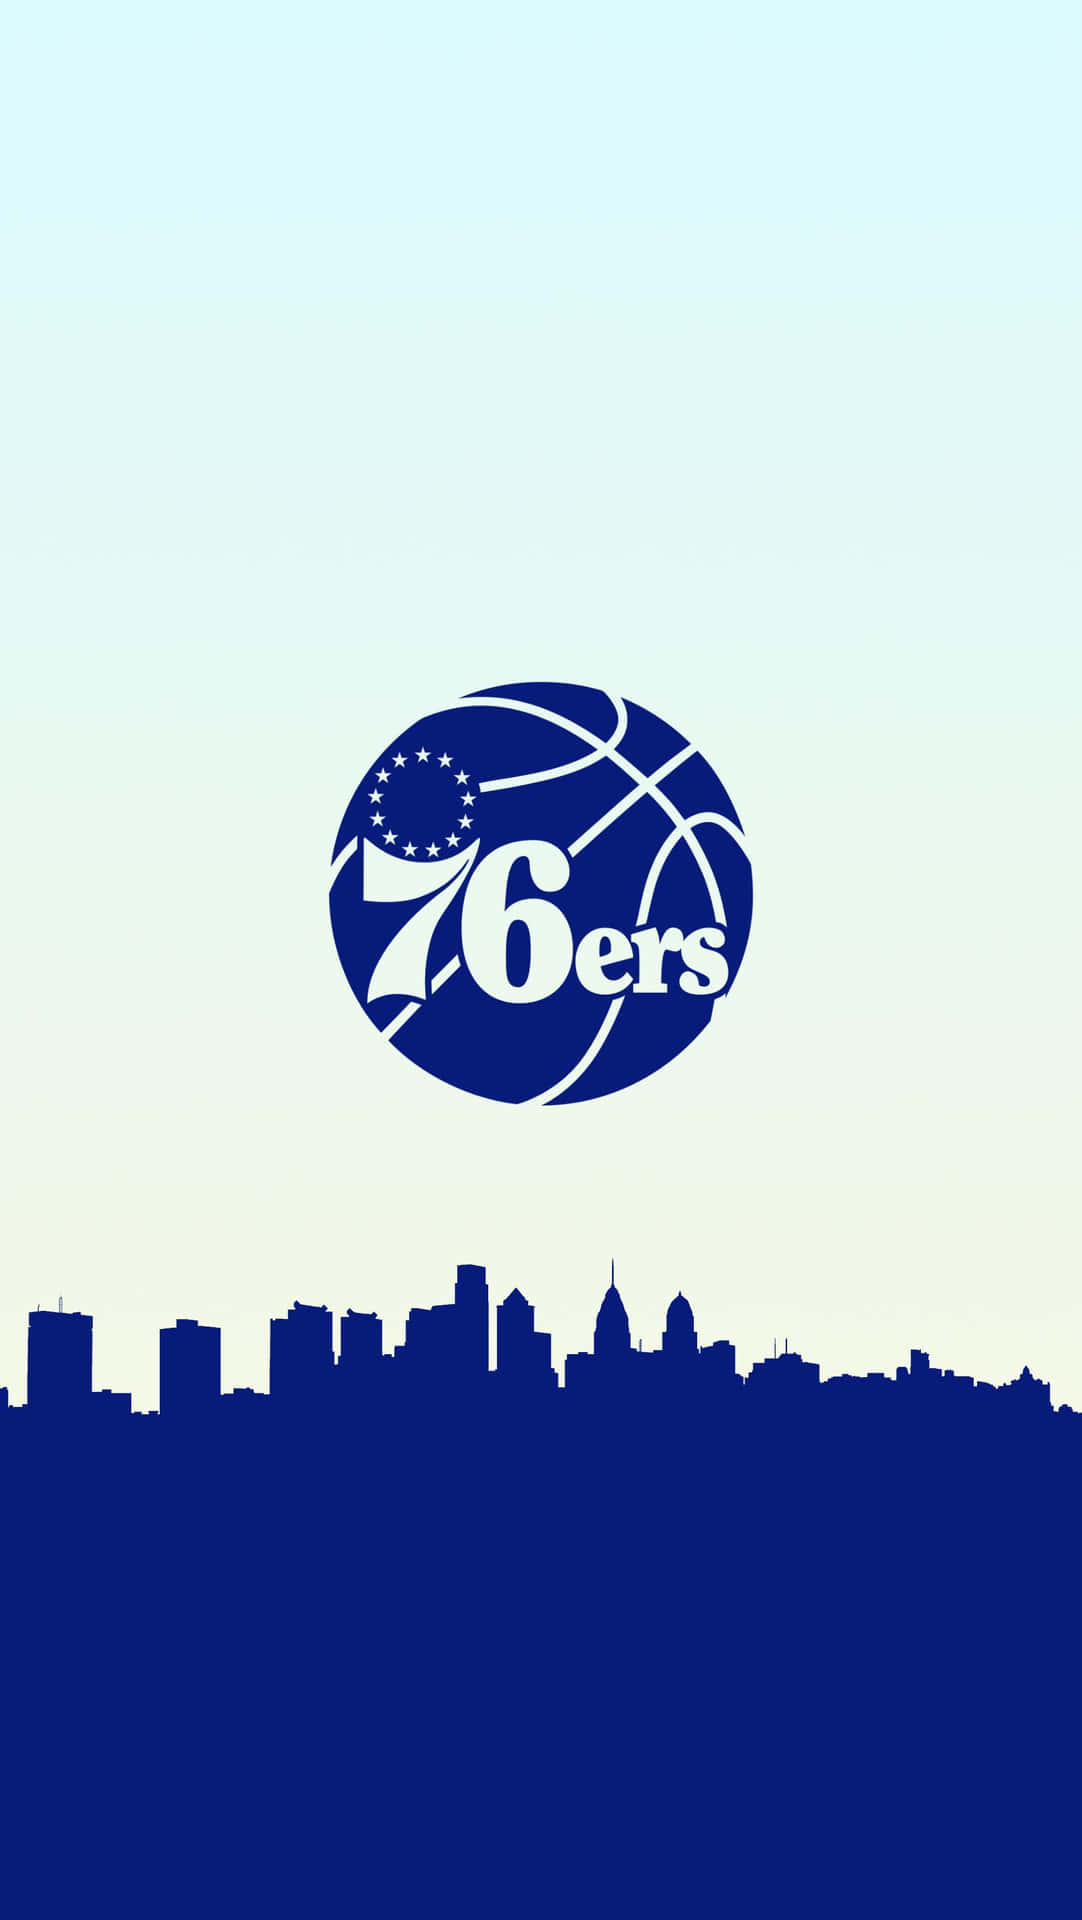 Get ready for the game with an officially licensed Sixers Iphone Wallpaper